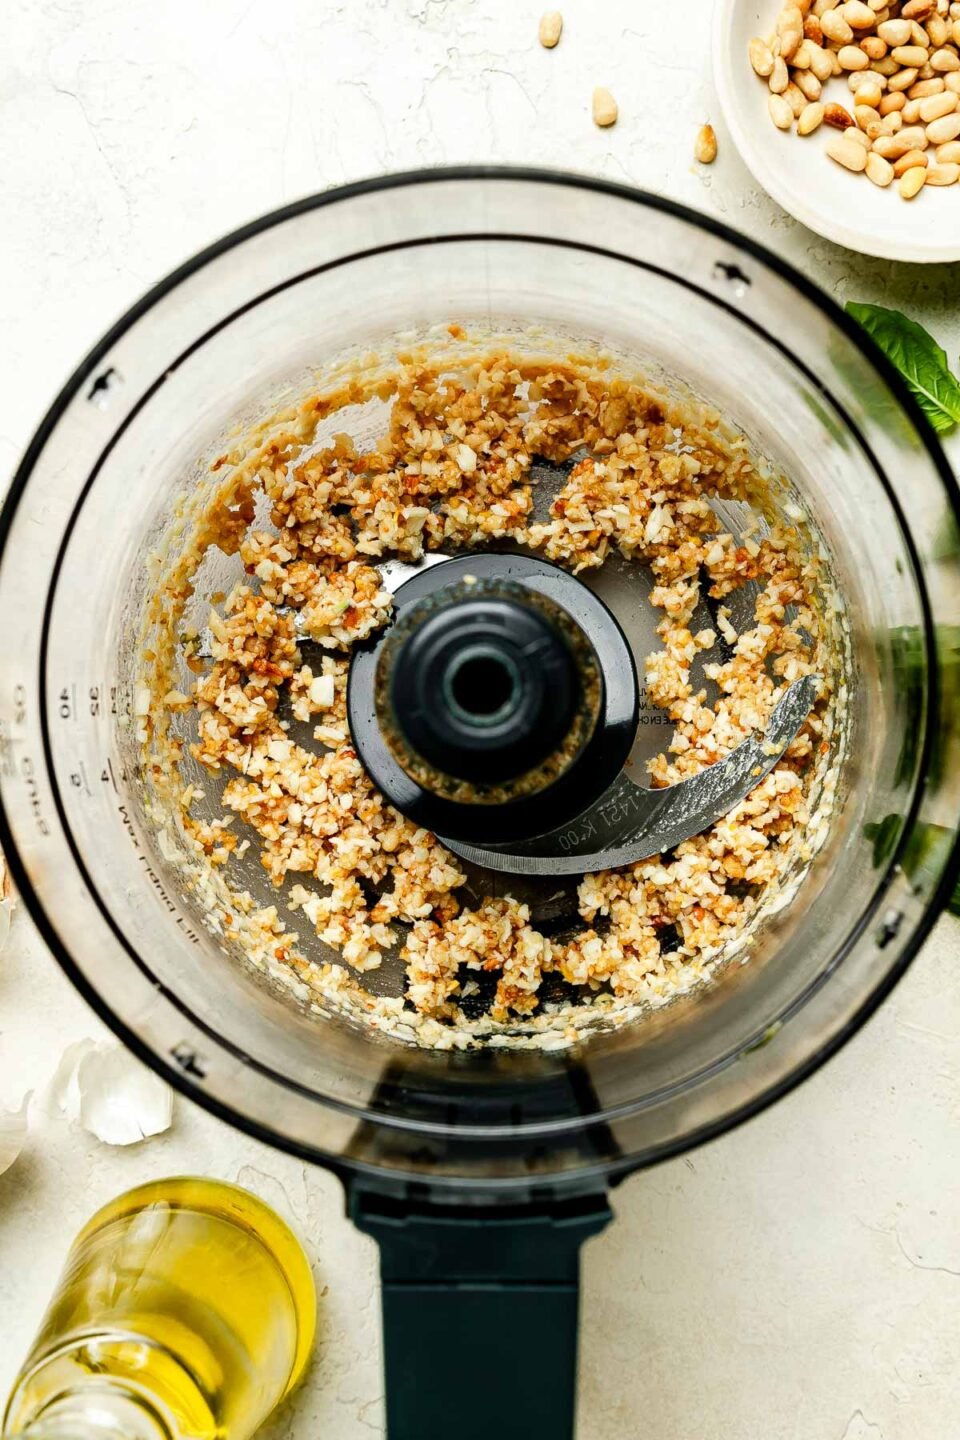 An overhead shot of a food processor with chopped pine nuts, sitting on a white surface. Olive oil and a bowl of pine nuts are sitting next to the food processor.